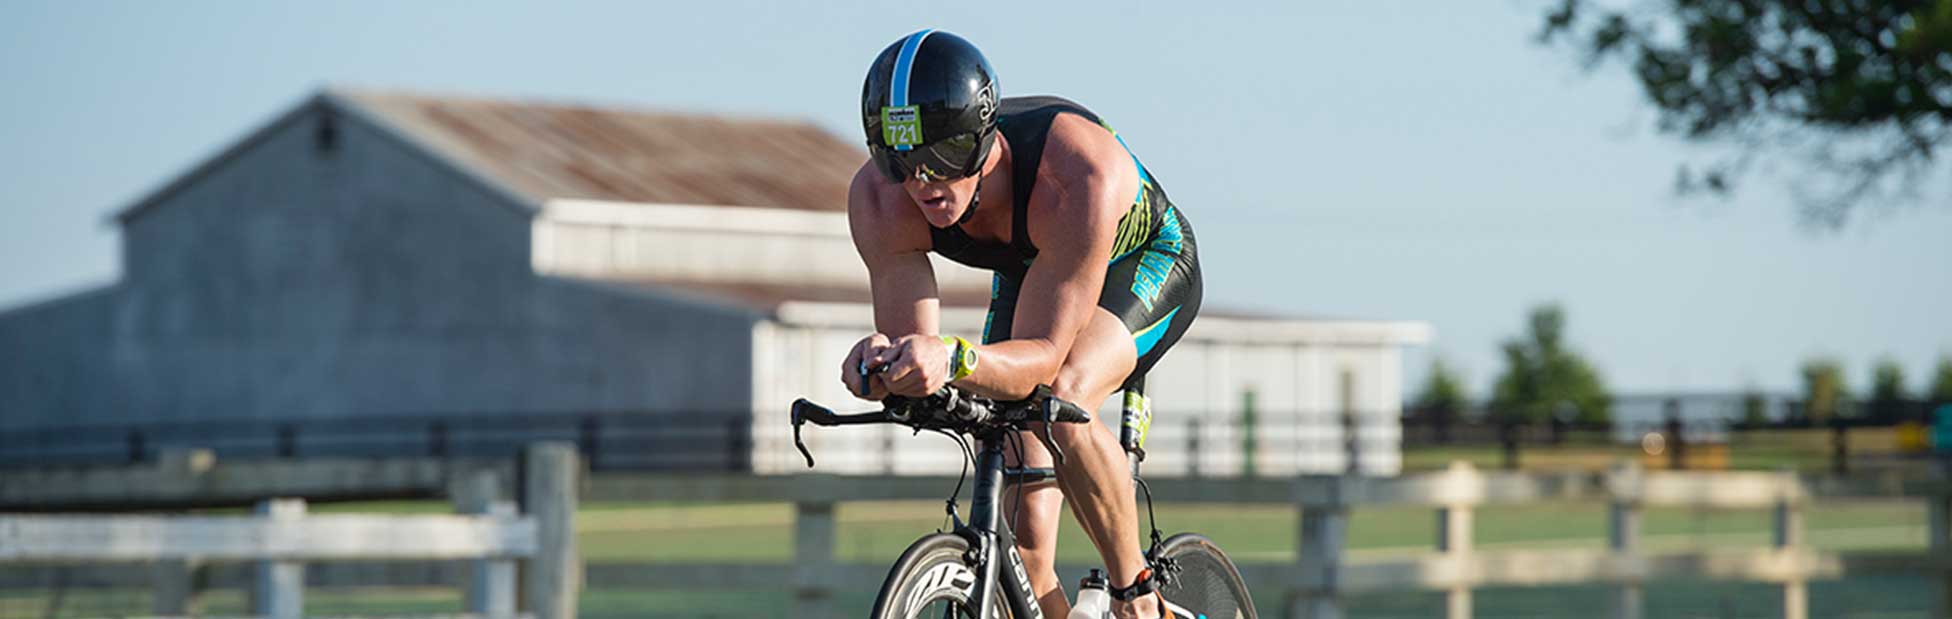 Male IRONMAN competitor on bike with shed in background